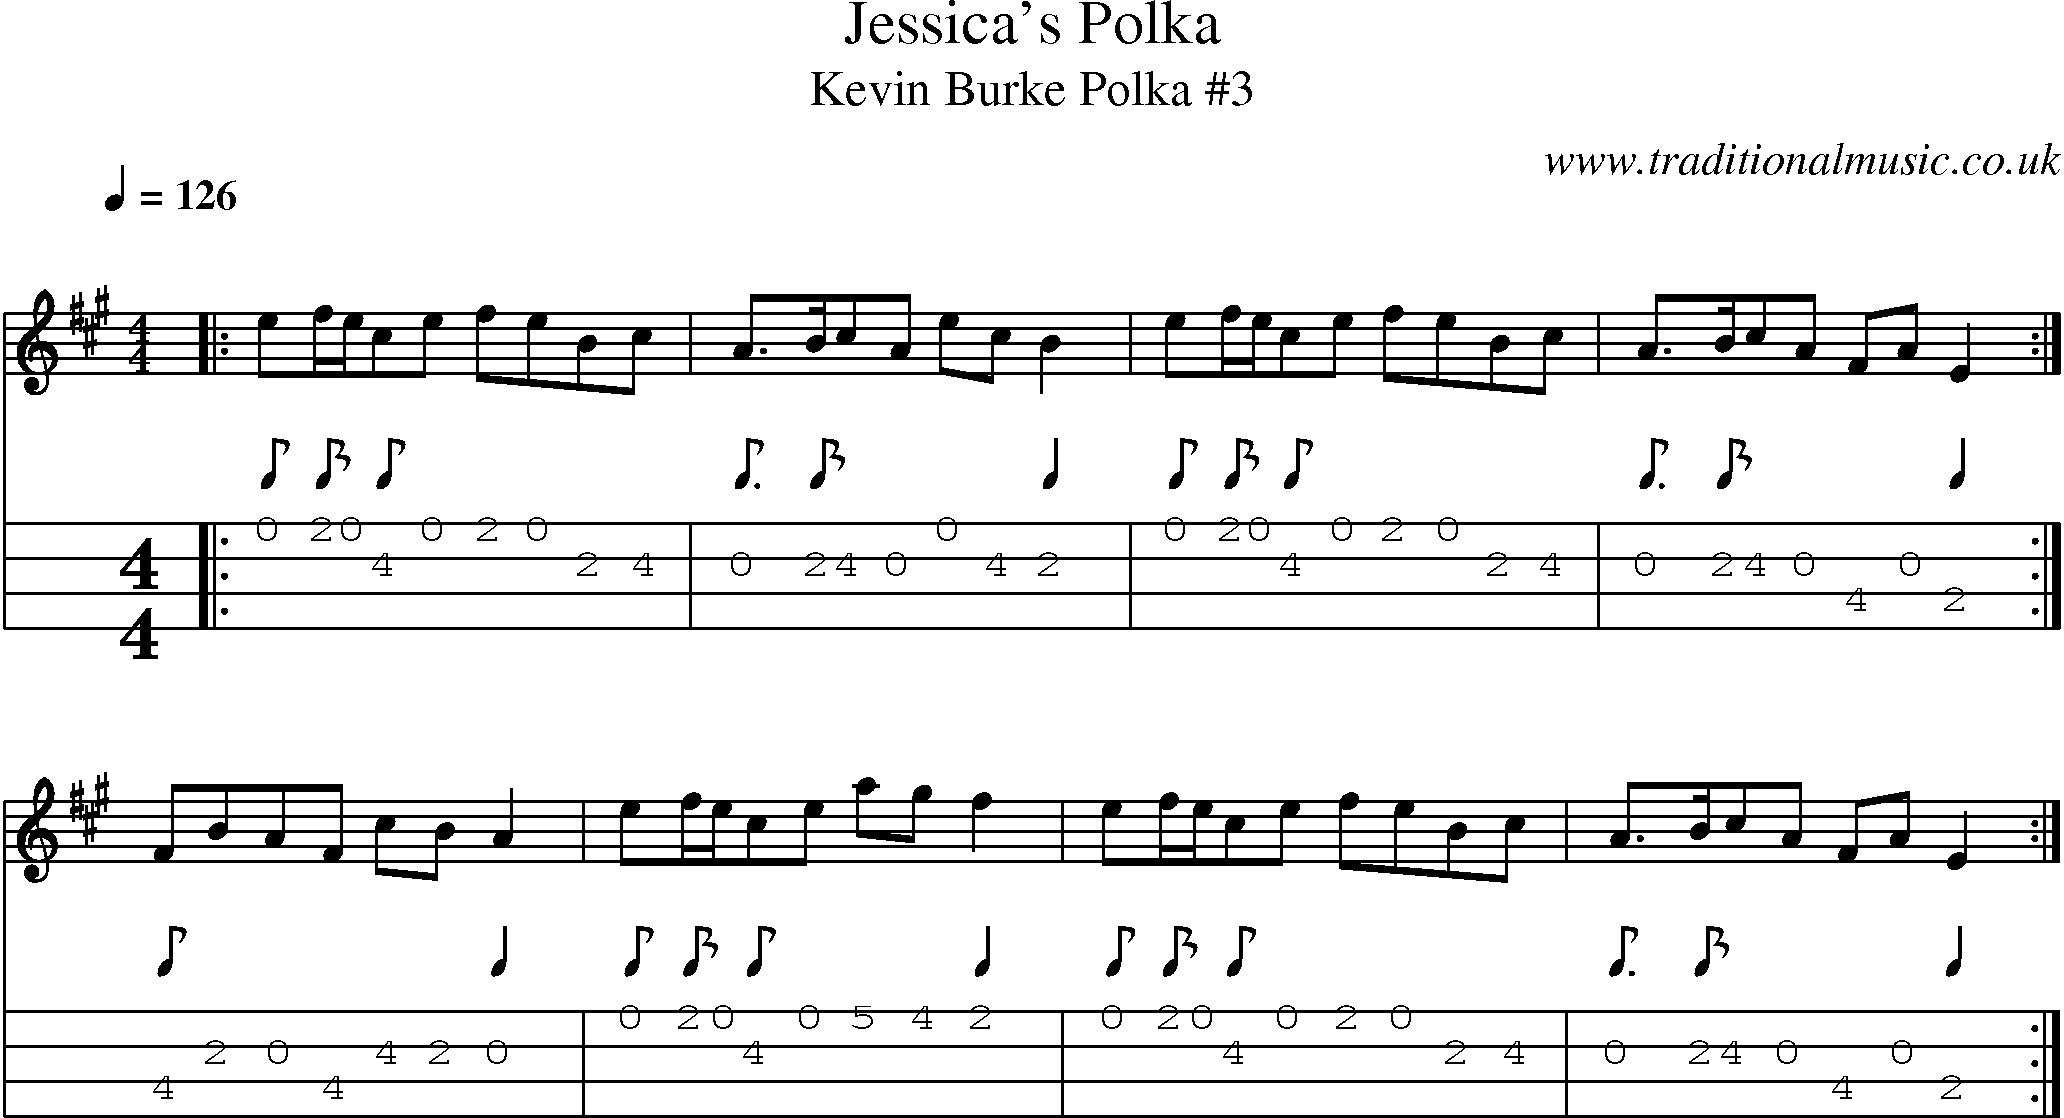 Music Score and Mandolin Tabs for Jessicas Polka